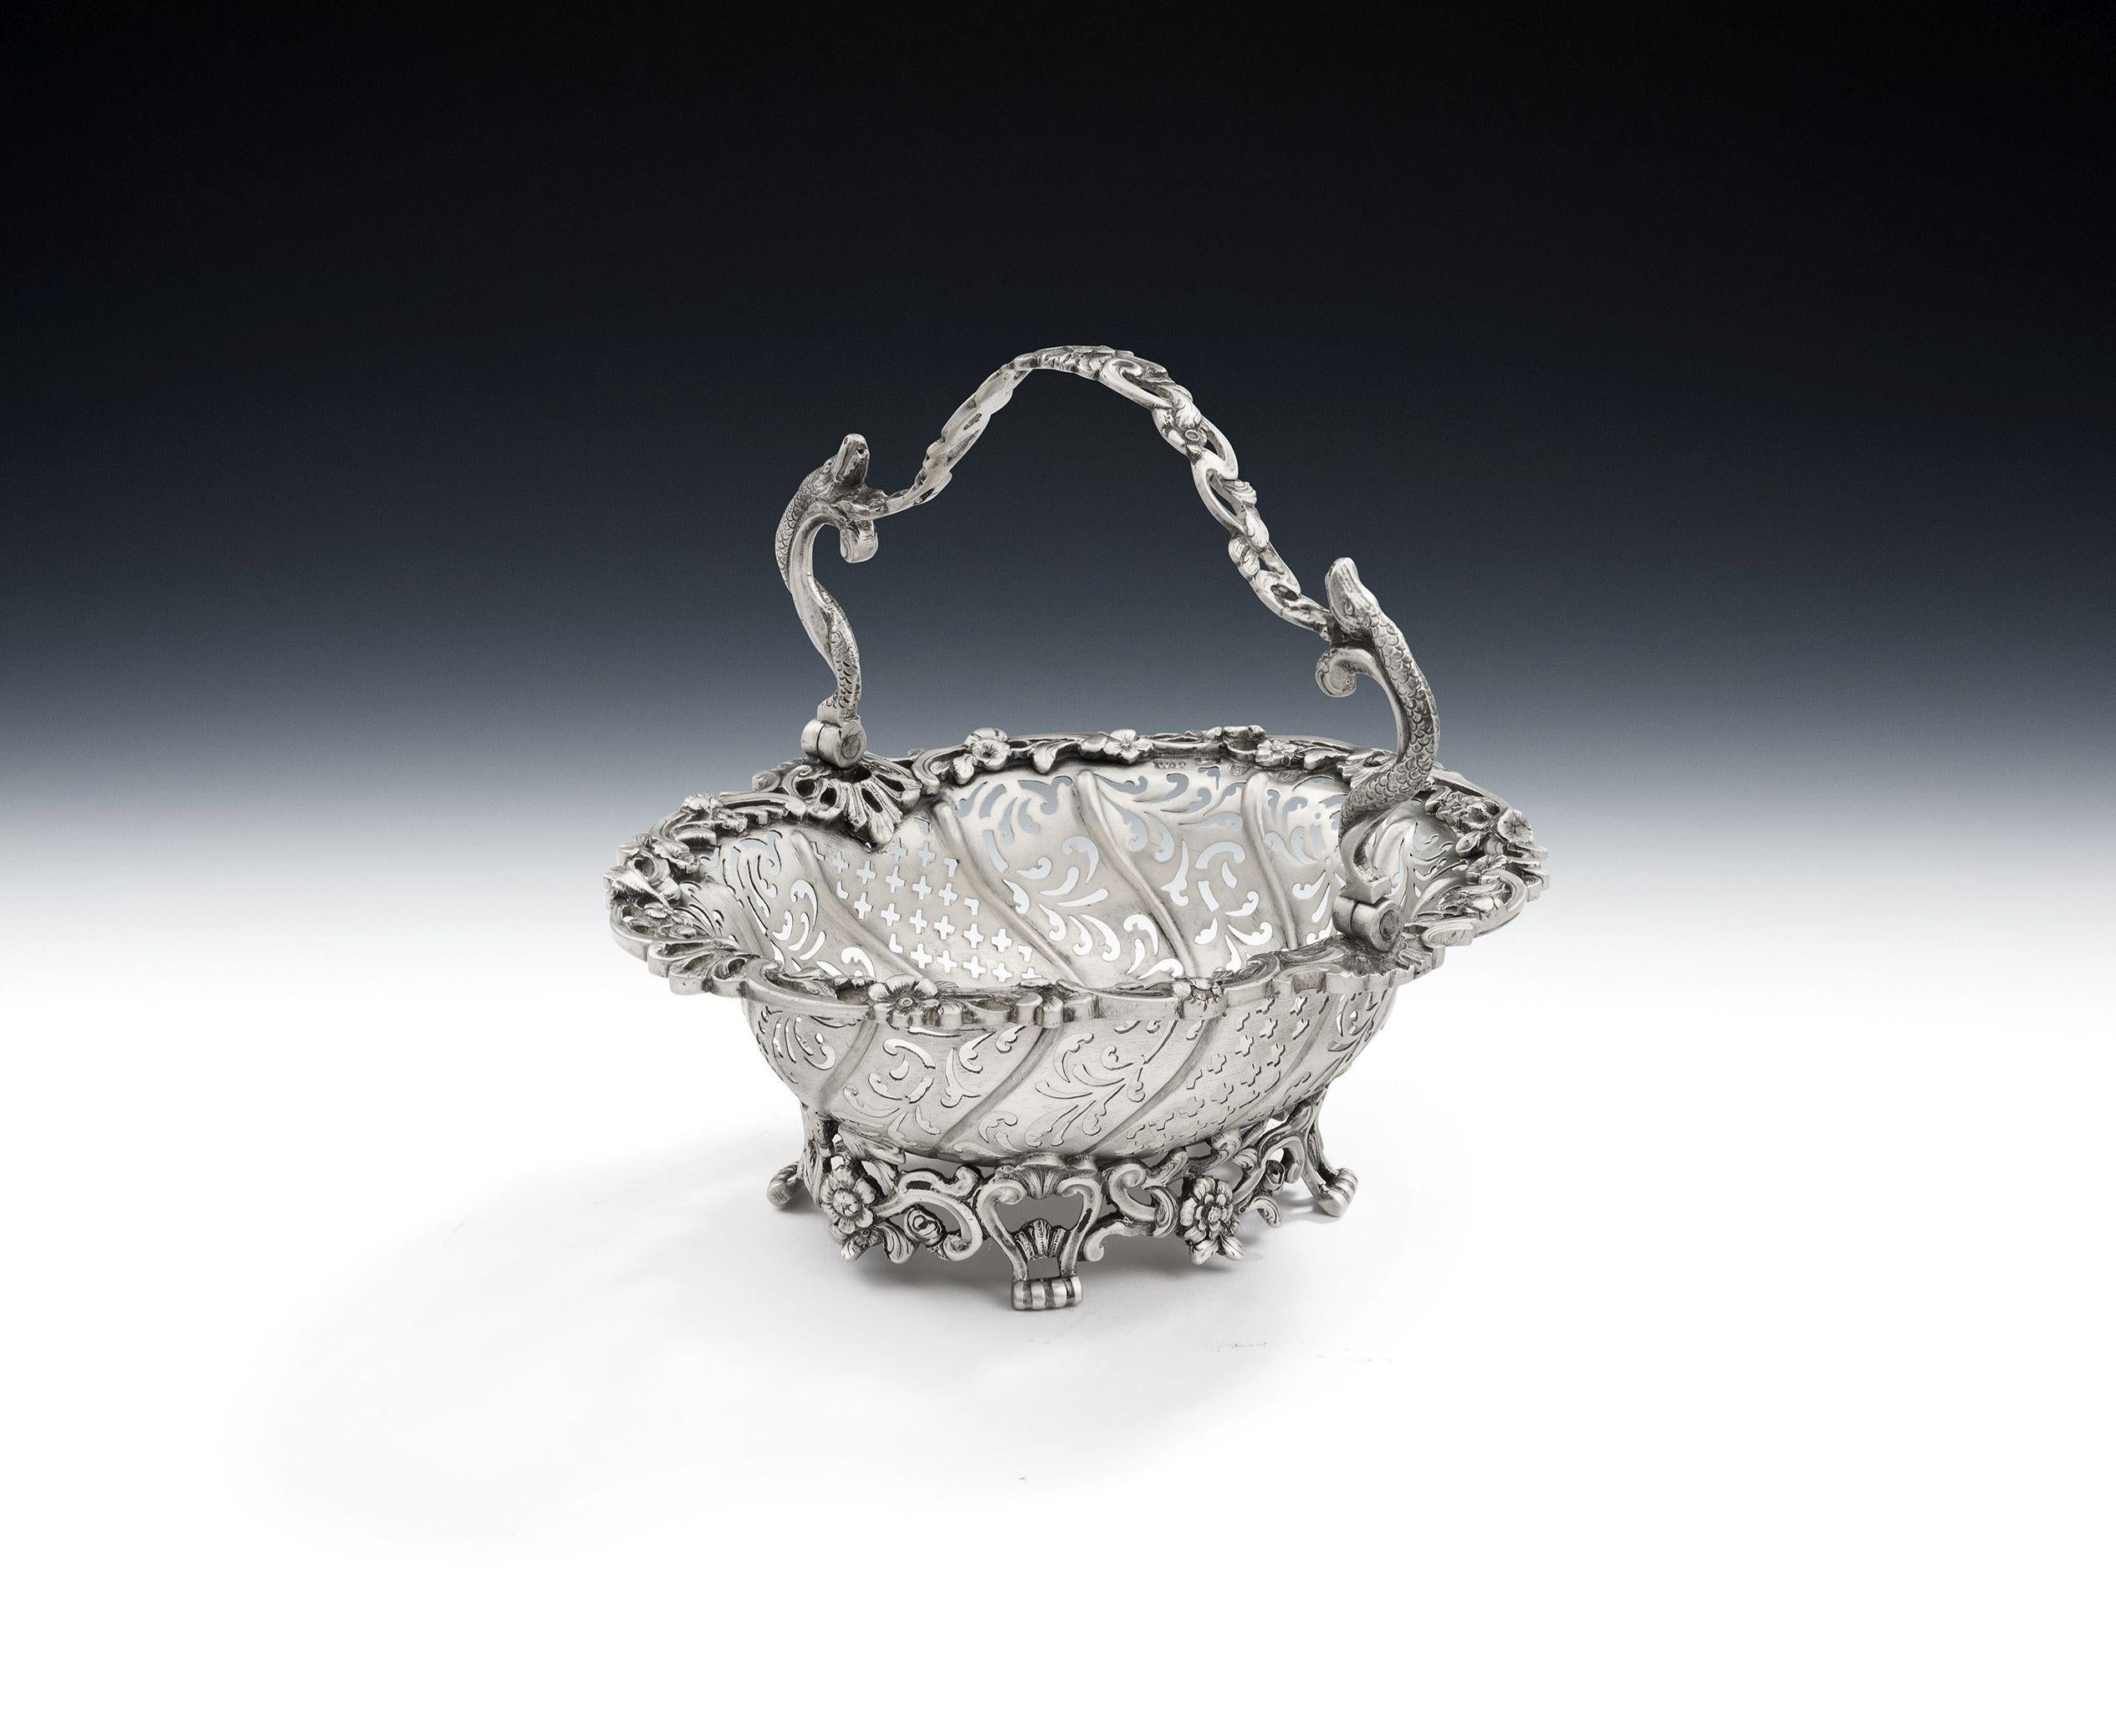 An Exceptionally Fine & Unusual George II Cast Sweetmeat Basket Made in London in 1758 by William Plummer

The basket is cast and stands on an openwork base decorated with scrolls and raying flower heads, together with four unusual stylised lyre